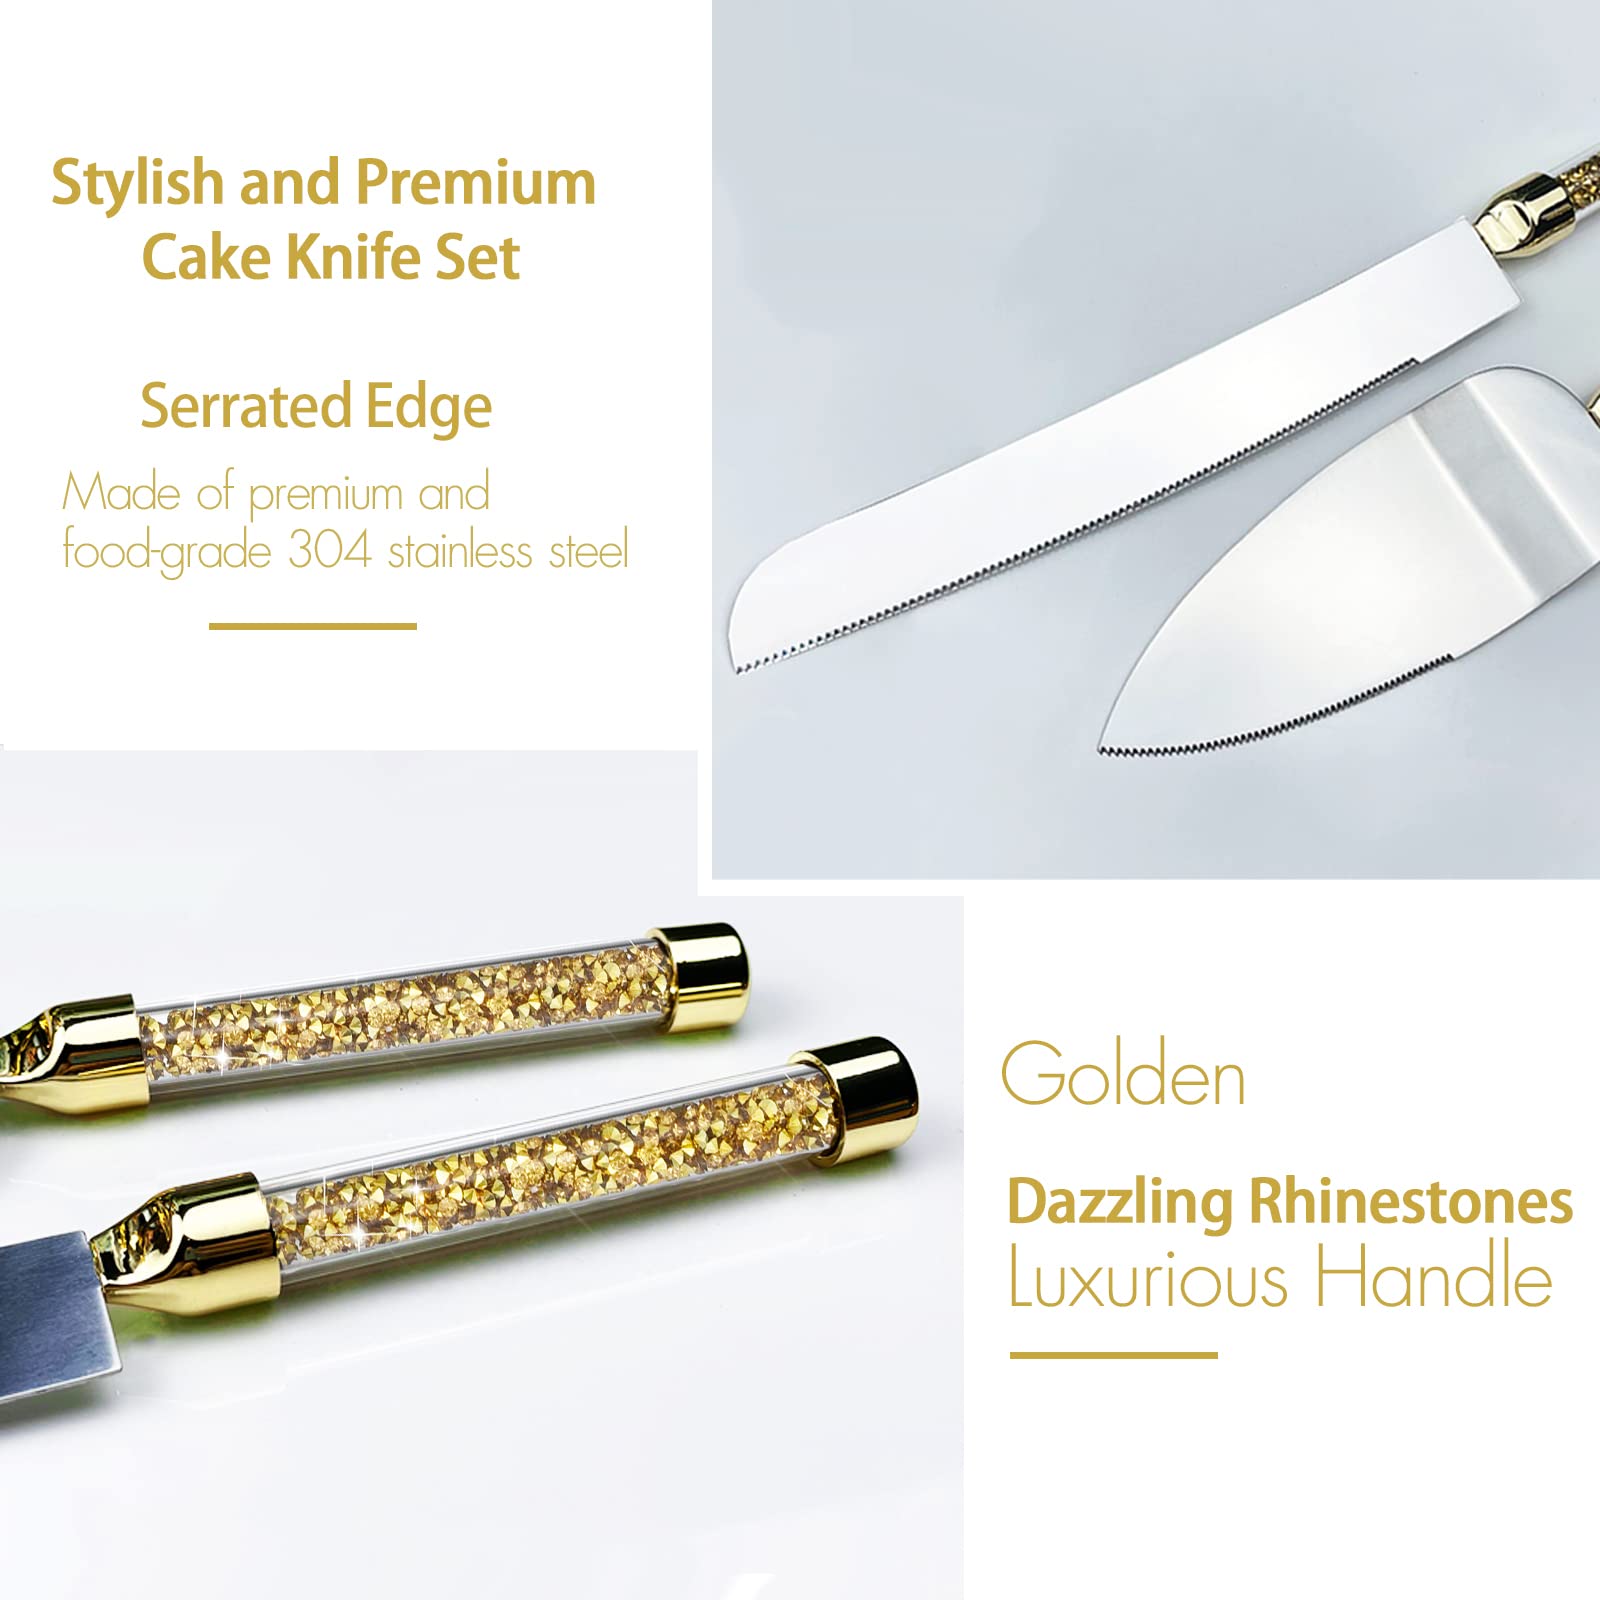 Stainless steel serrated edge knife with Rhinestone hand;e